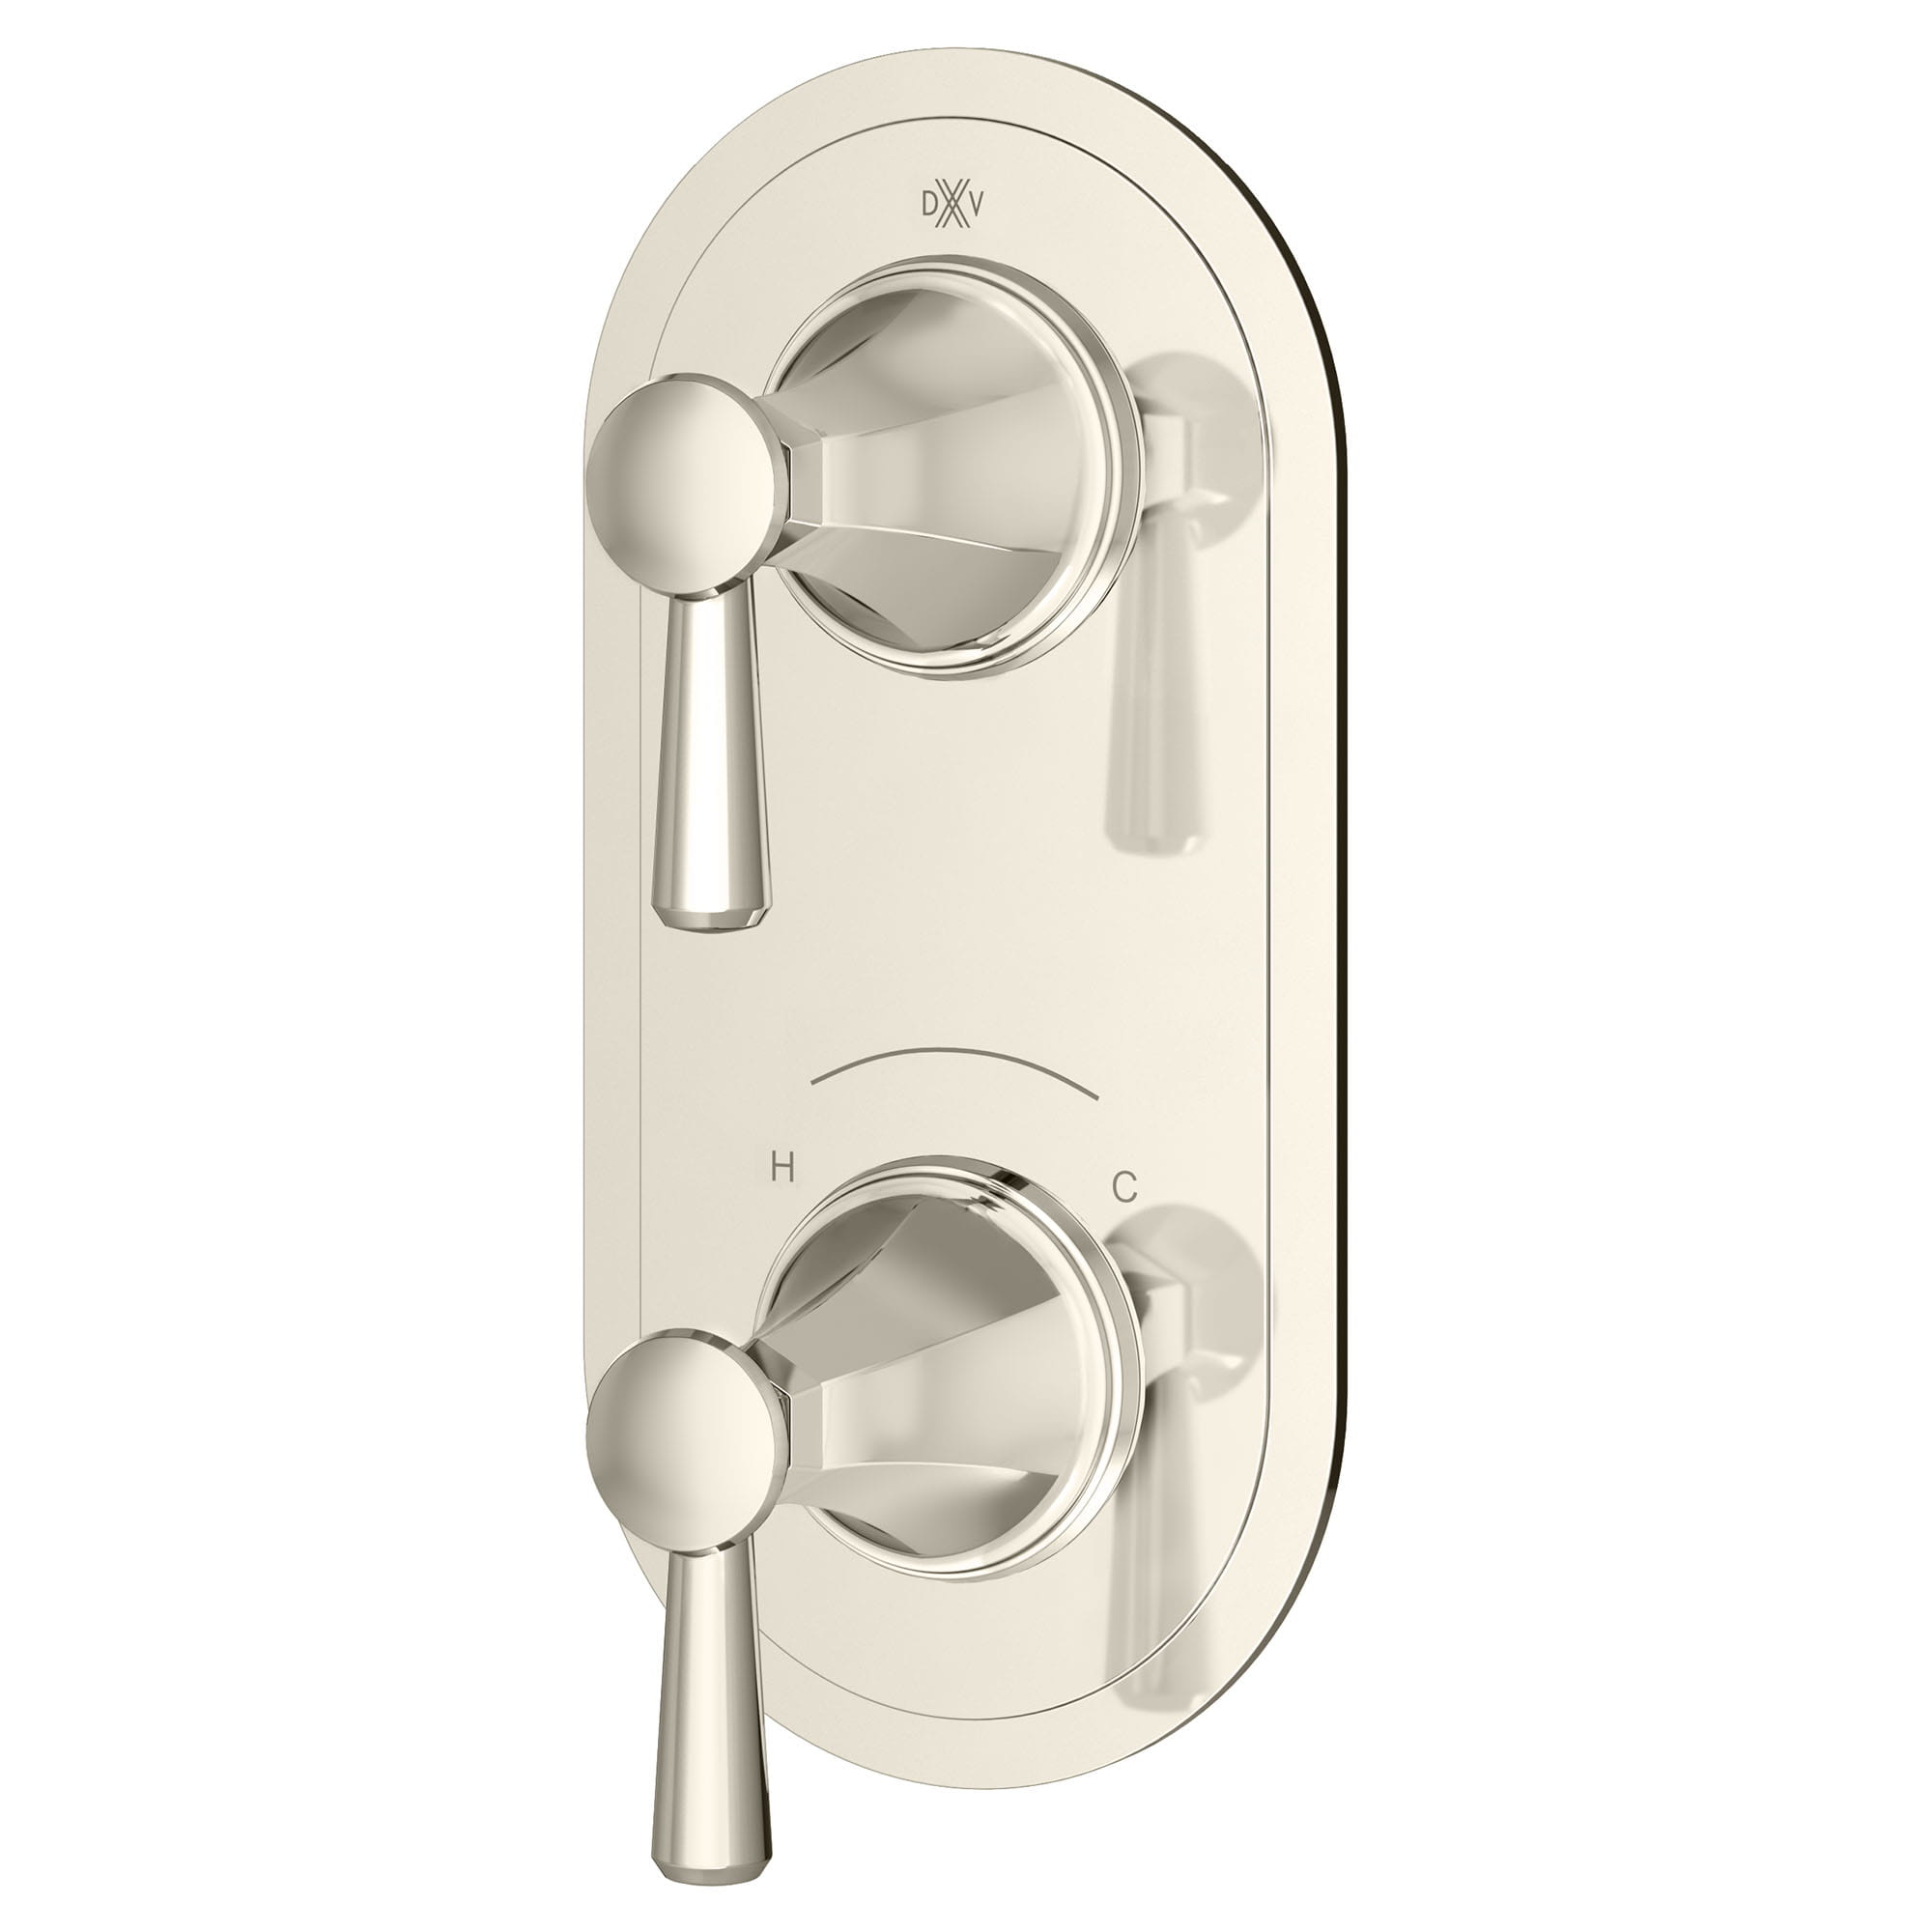 Fitzgerald 2-Handle Thermostatic Valve Trim Only with Lever Handles